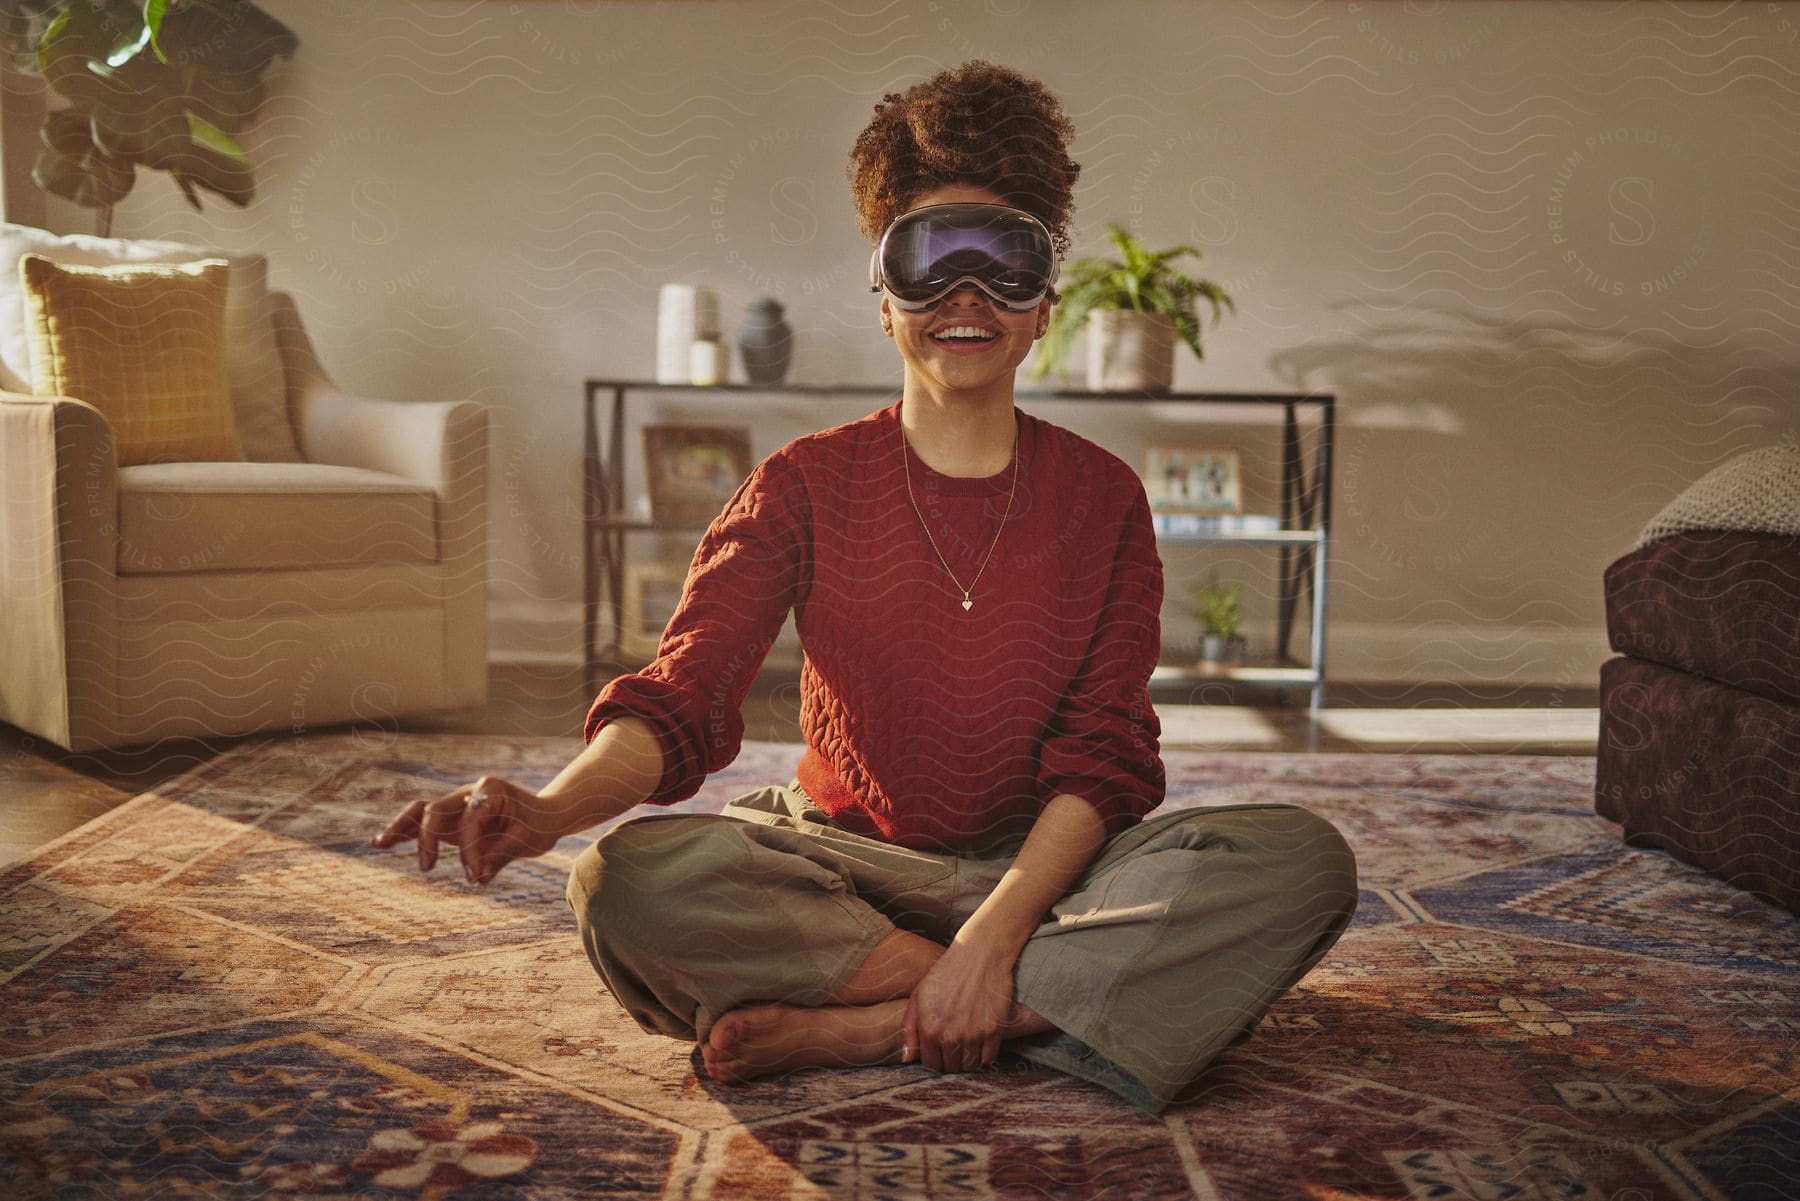 A woman is sitting on a rug in a living room and is smiling while wearing virtual reality glasses and has one hand pointing forward